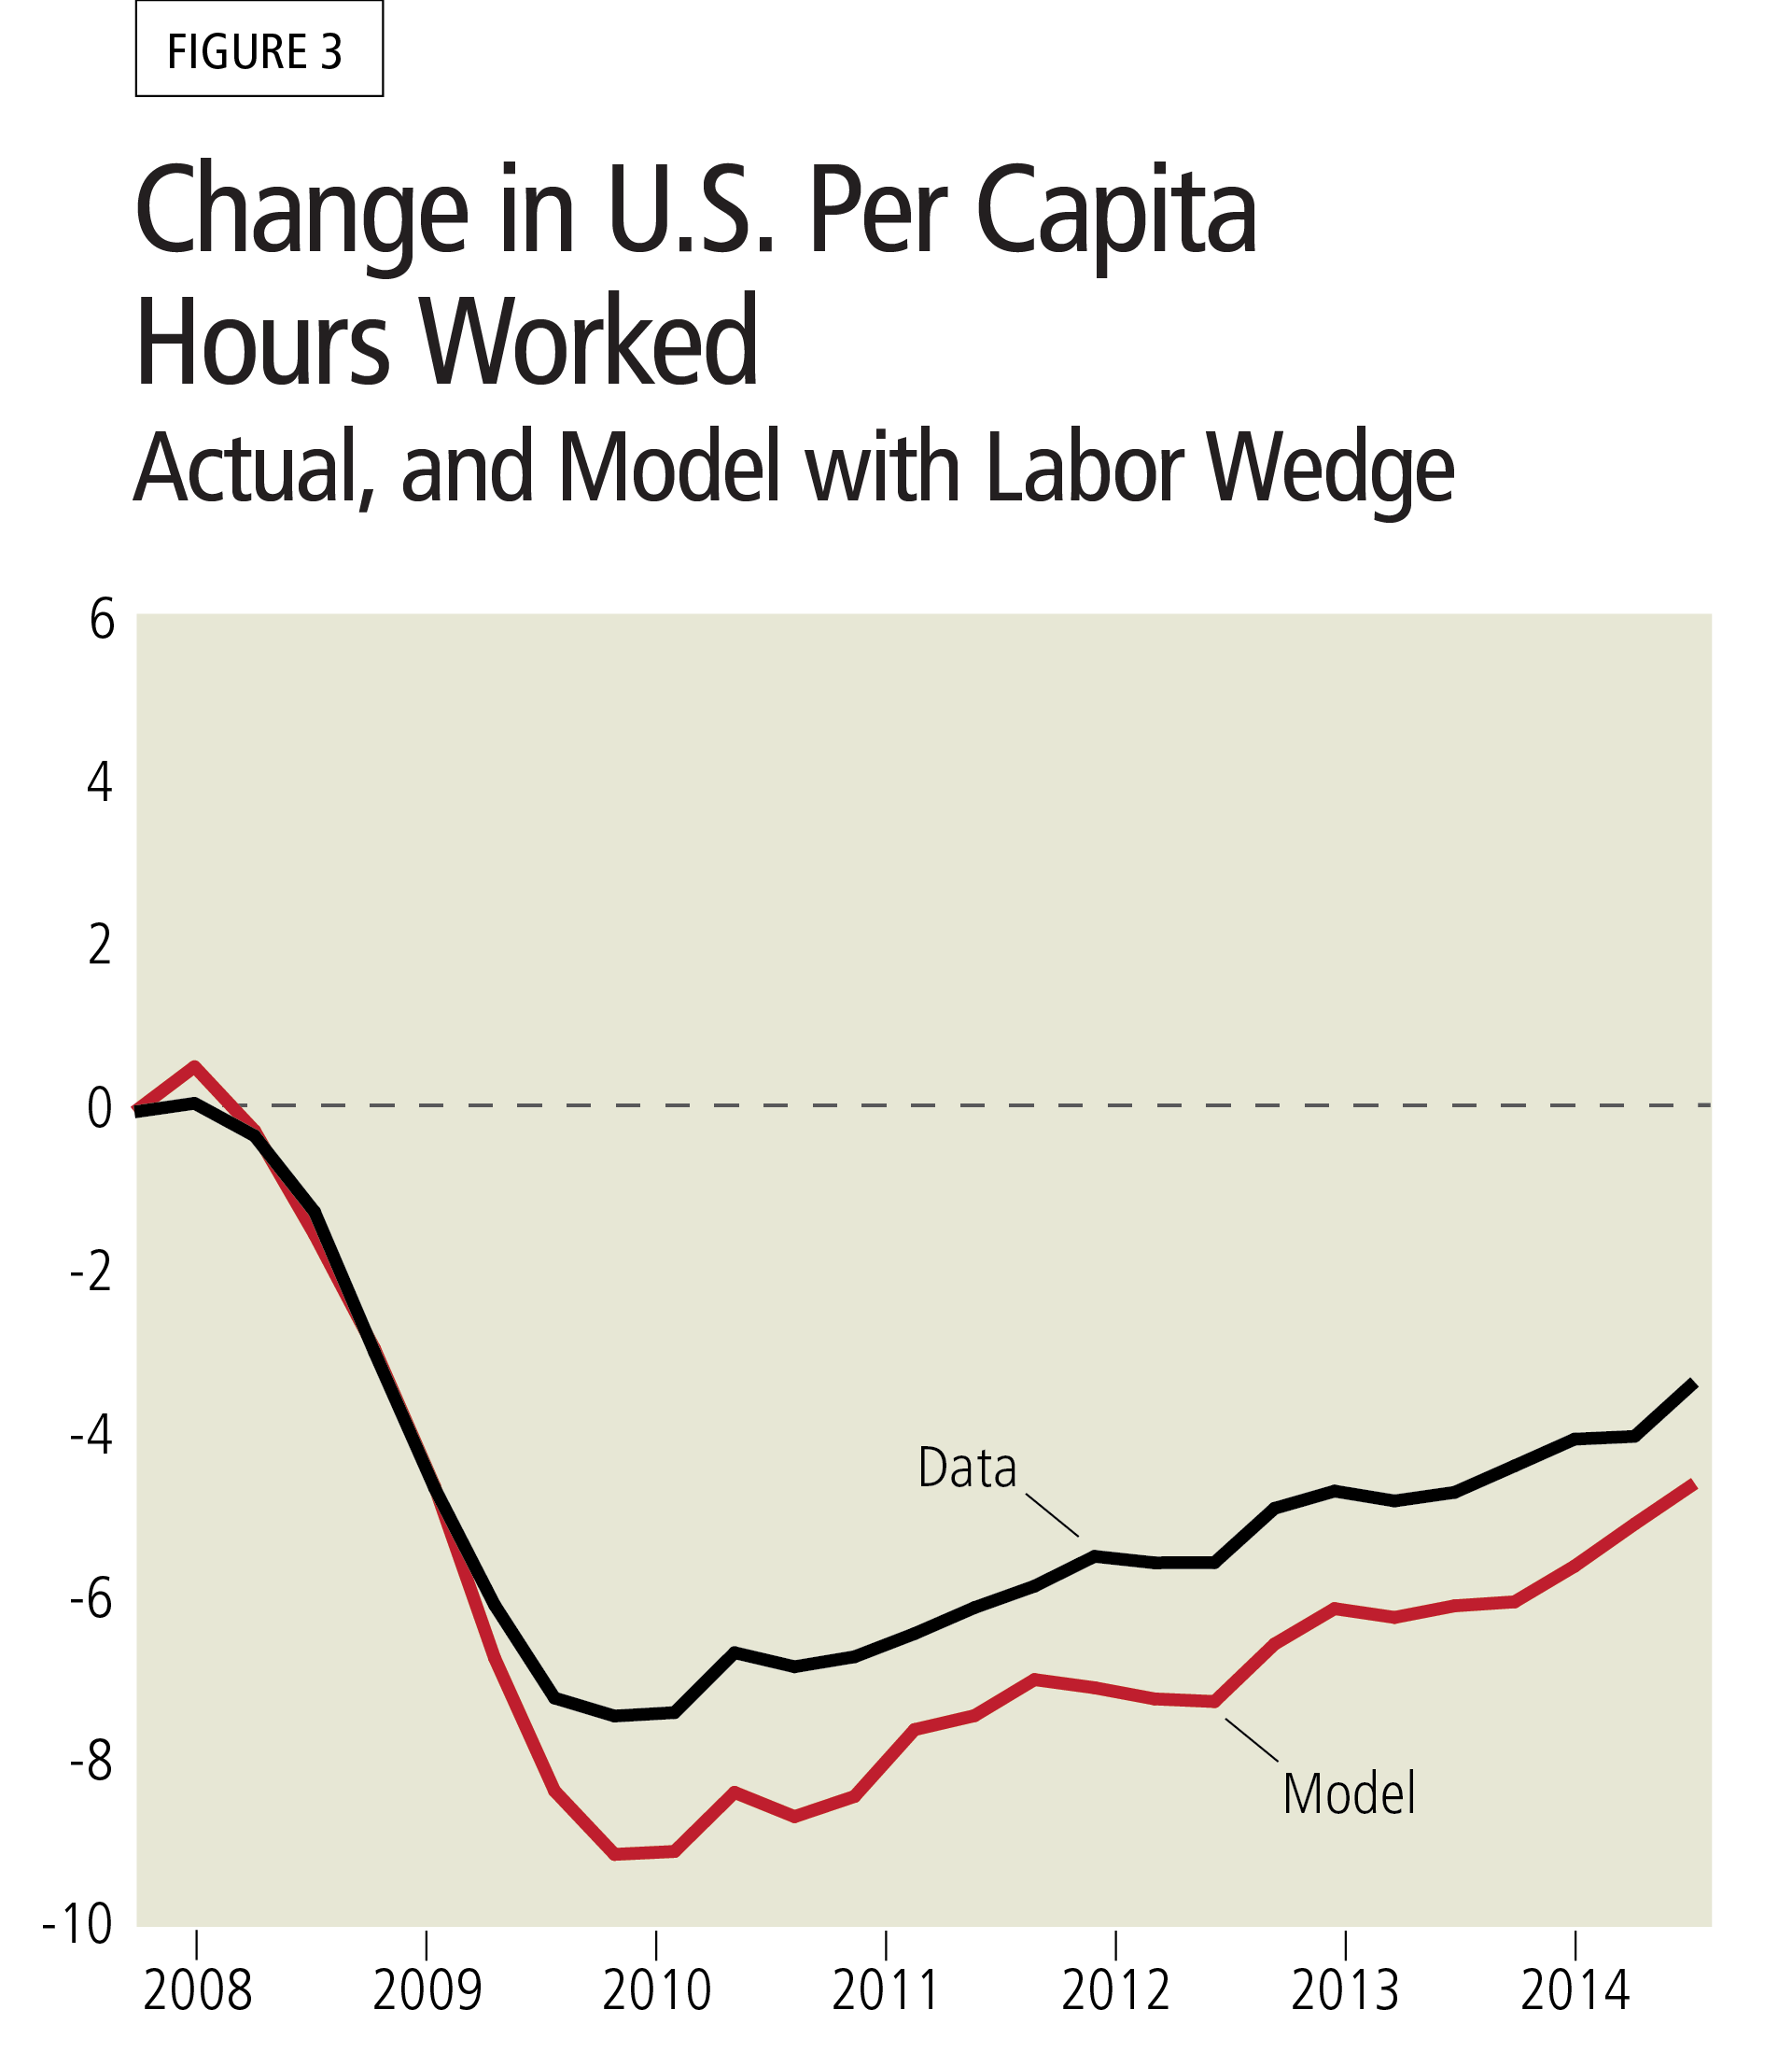 Figure 3: Change in U.S. Per Capita Hours Worked - Actual, and Model with Labor Wedge